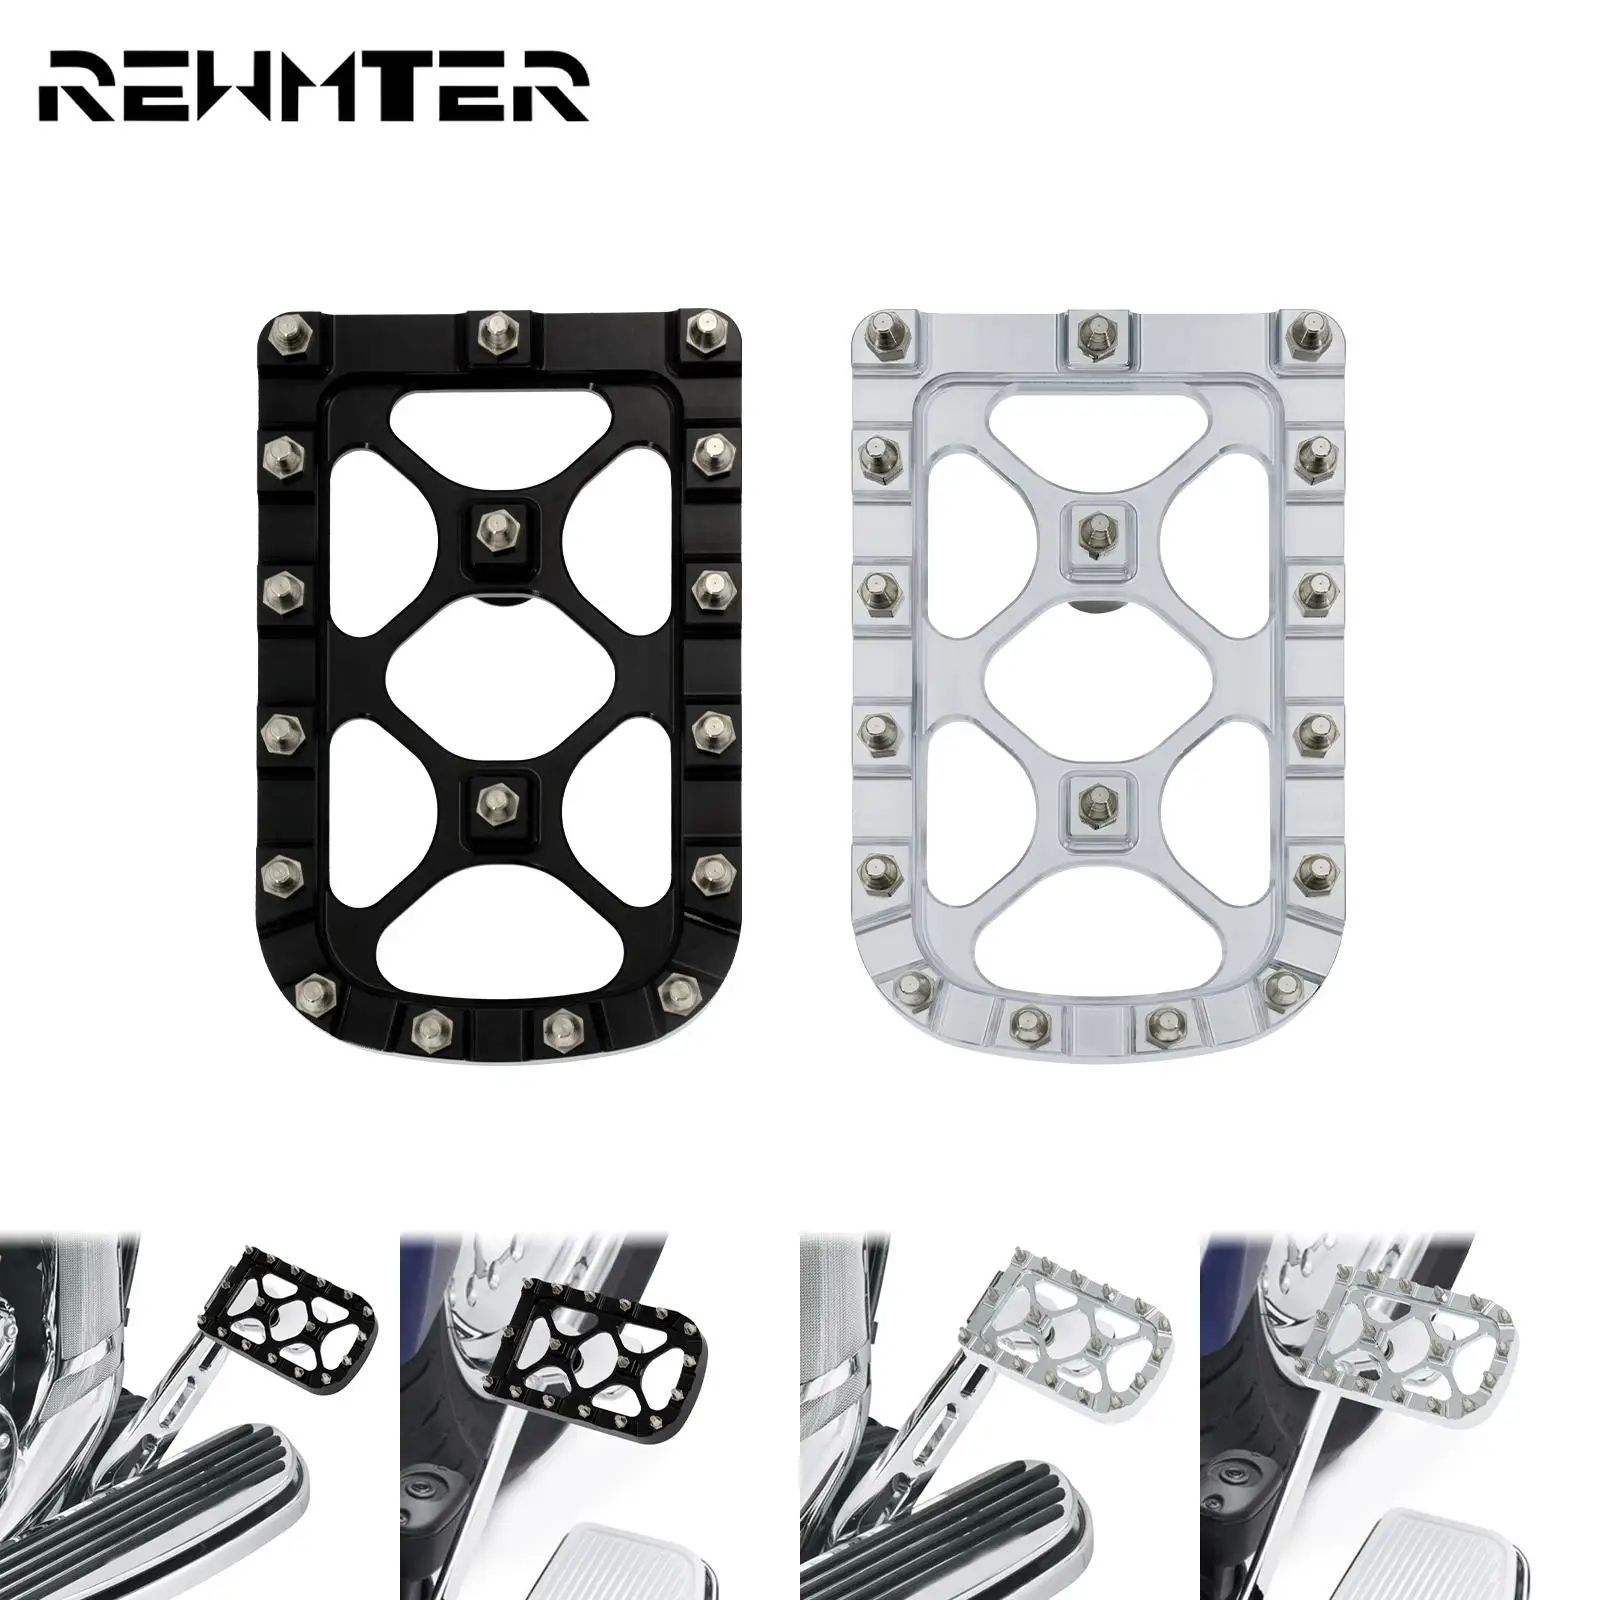 

Motorcycle Brake Pedal Pad Cover Footrest Footpegs Large Pad For Harley Touring Electra Street Glide Dyna Softail FL Slim FLD